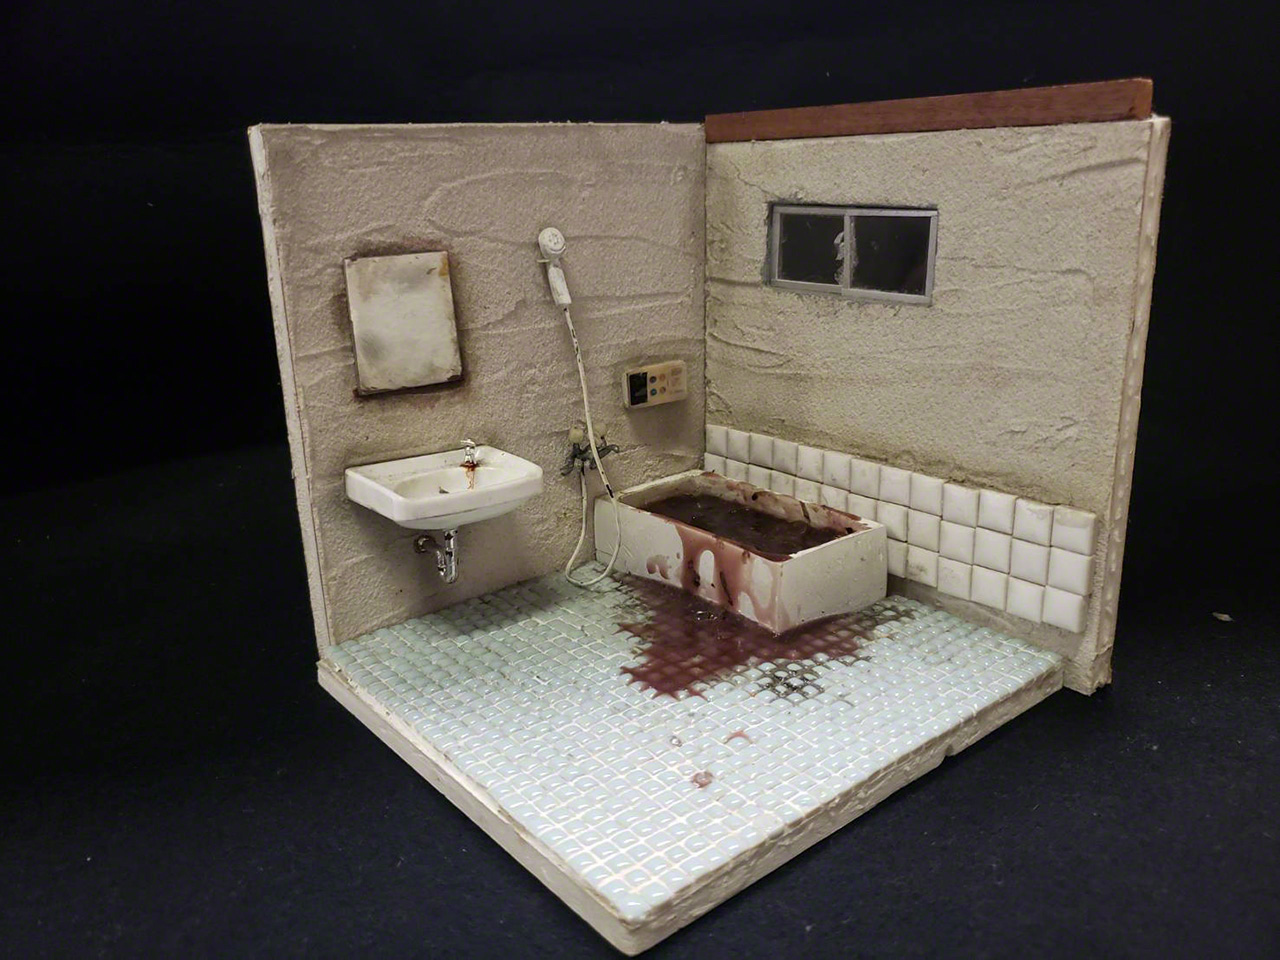 “Kodokushi Caused by Heat Shock” depicts the bathtub where the victim was discovered.